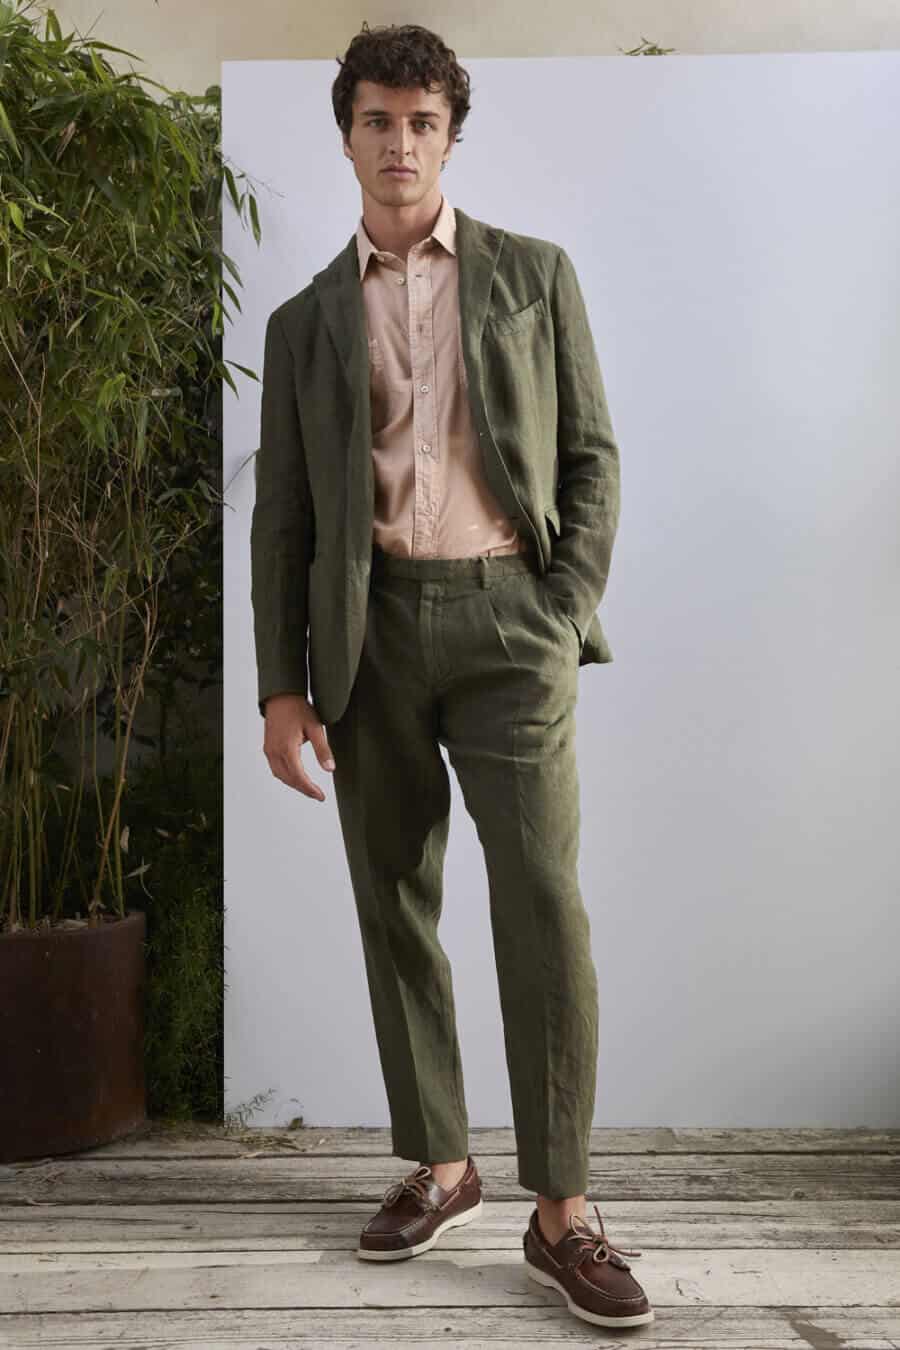 Men's olive green linen suit worn with brown deck shoes